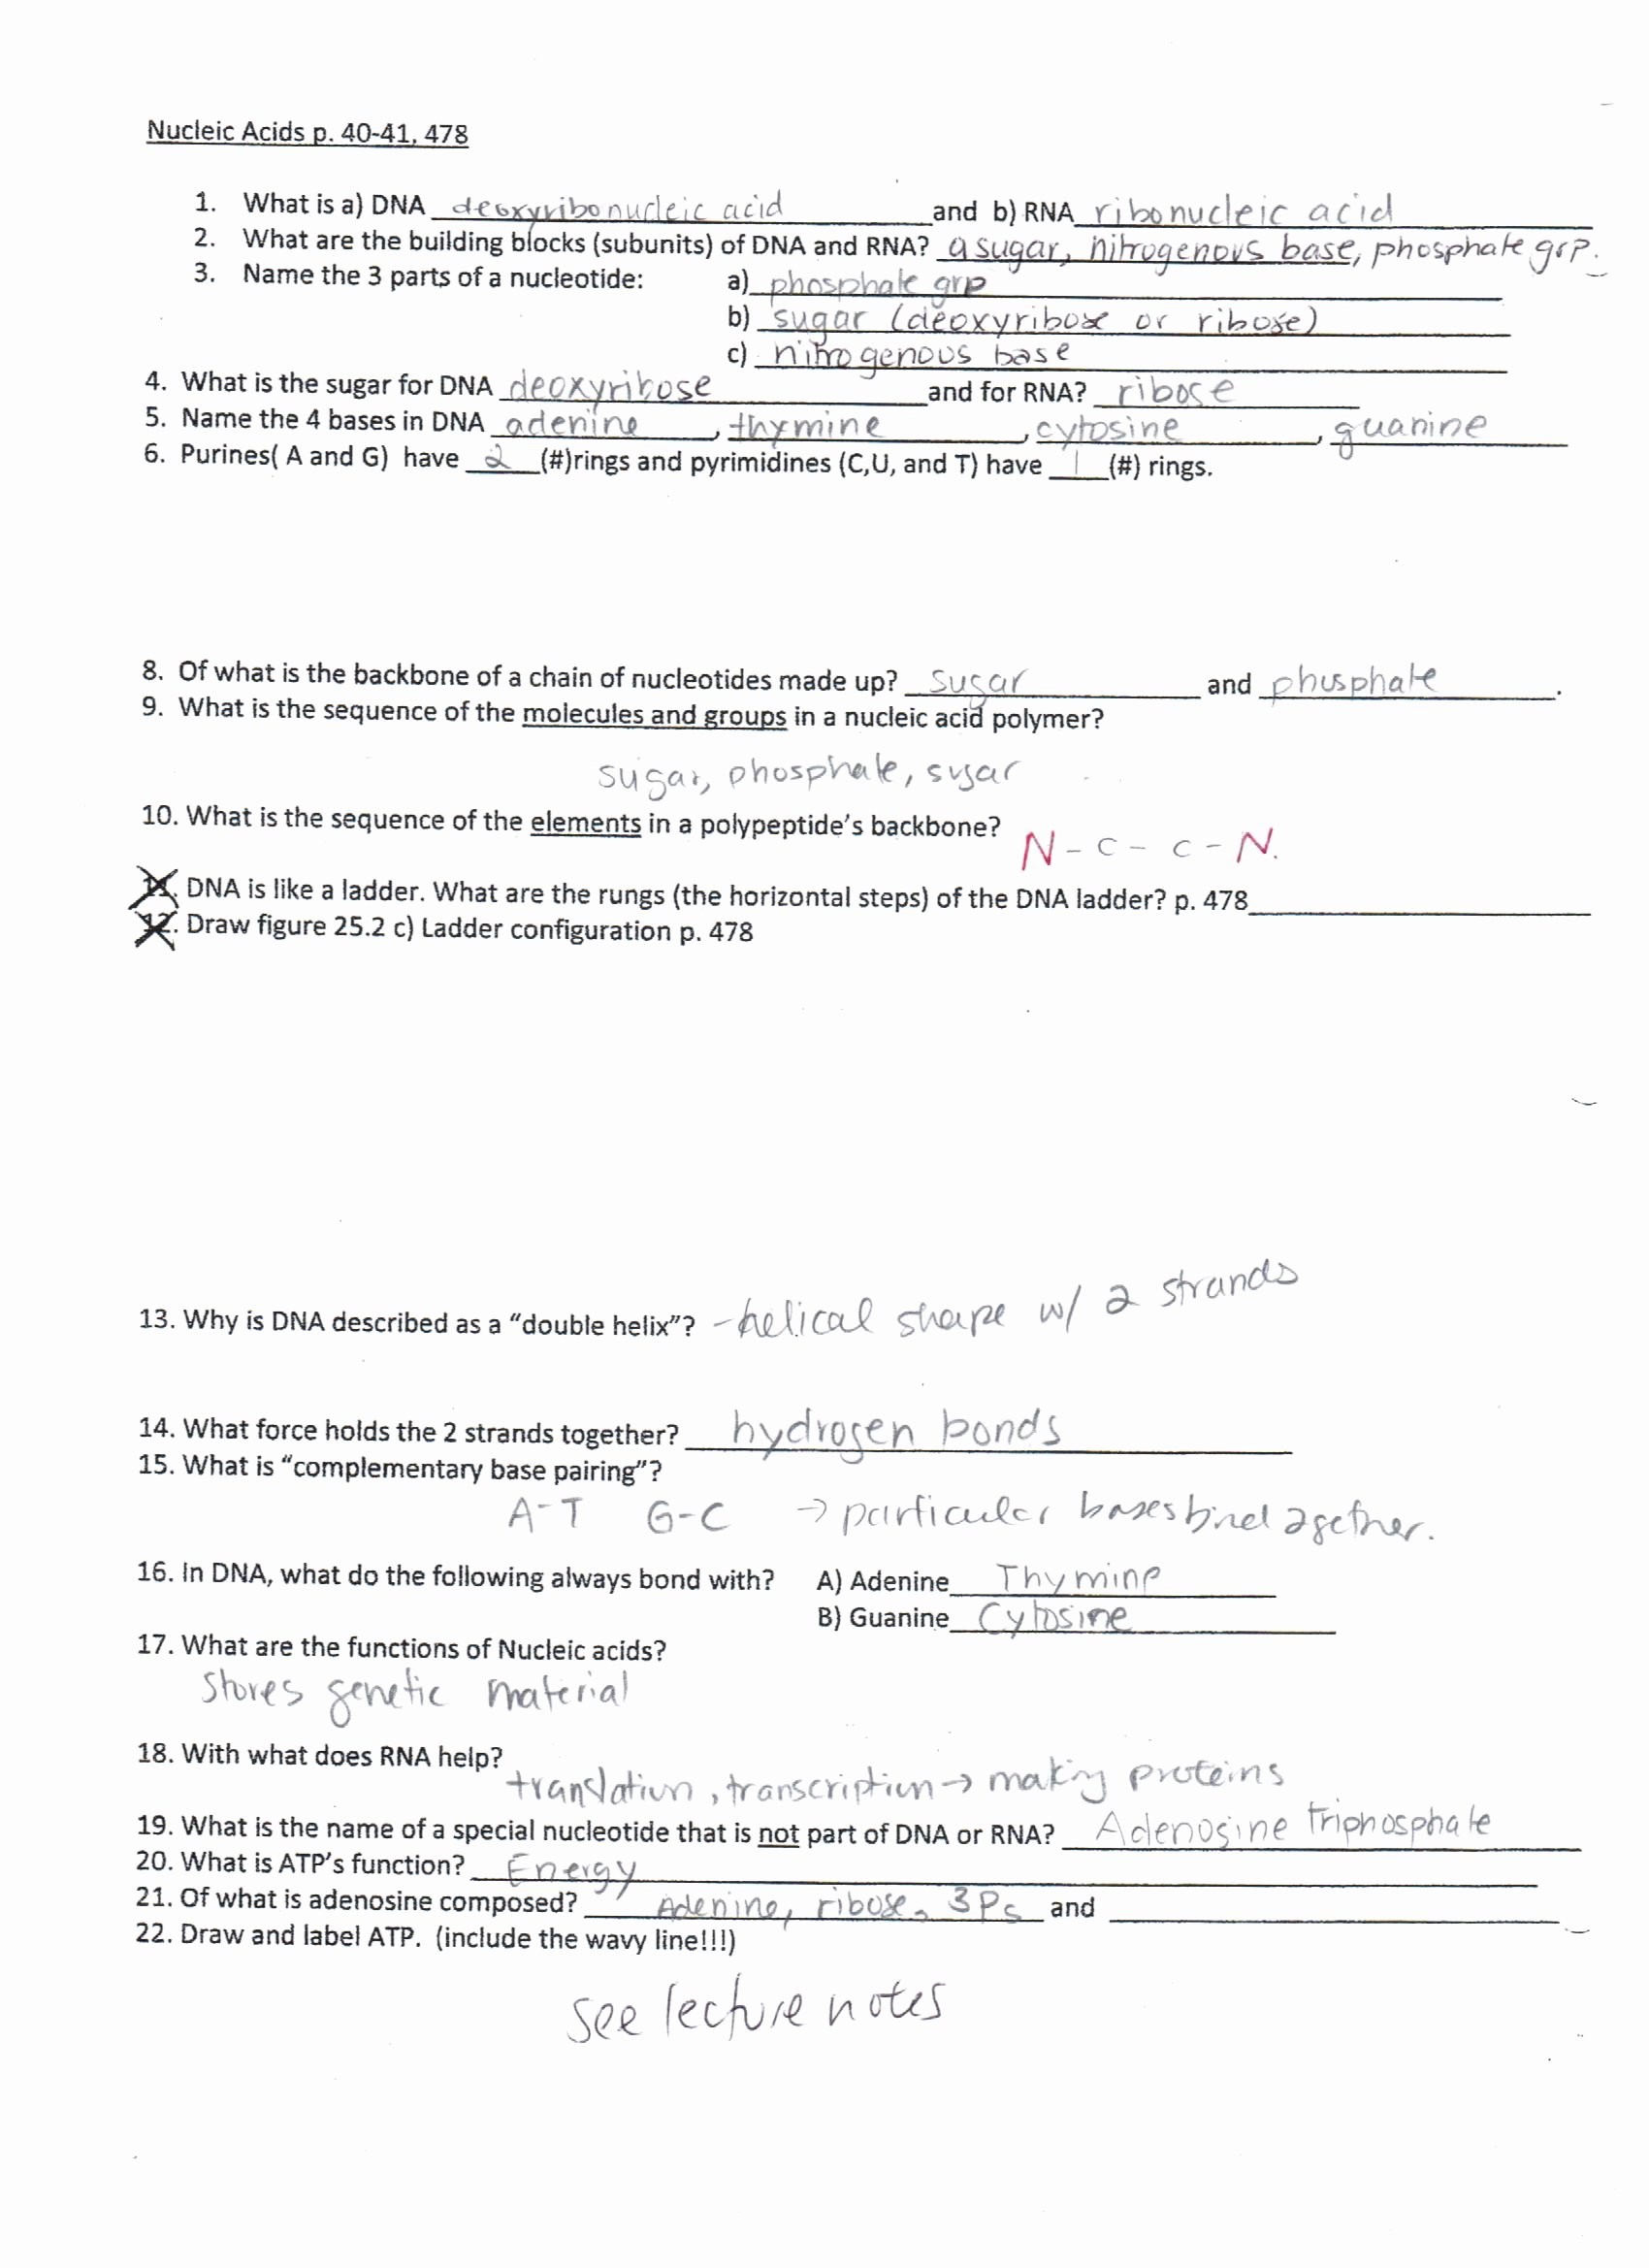 Nucleic Acid Worksheet Answers Fresh 301 Moved Permanently